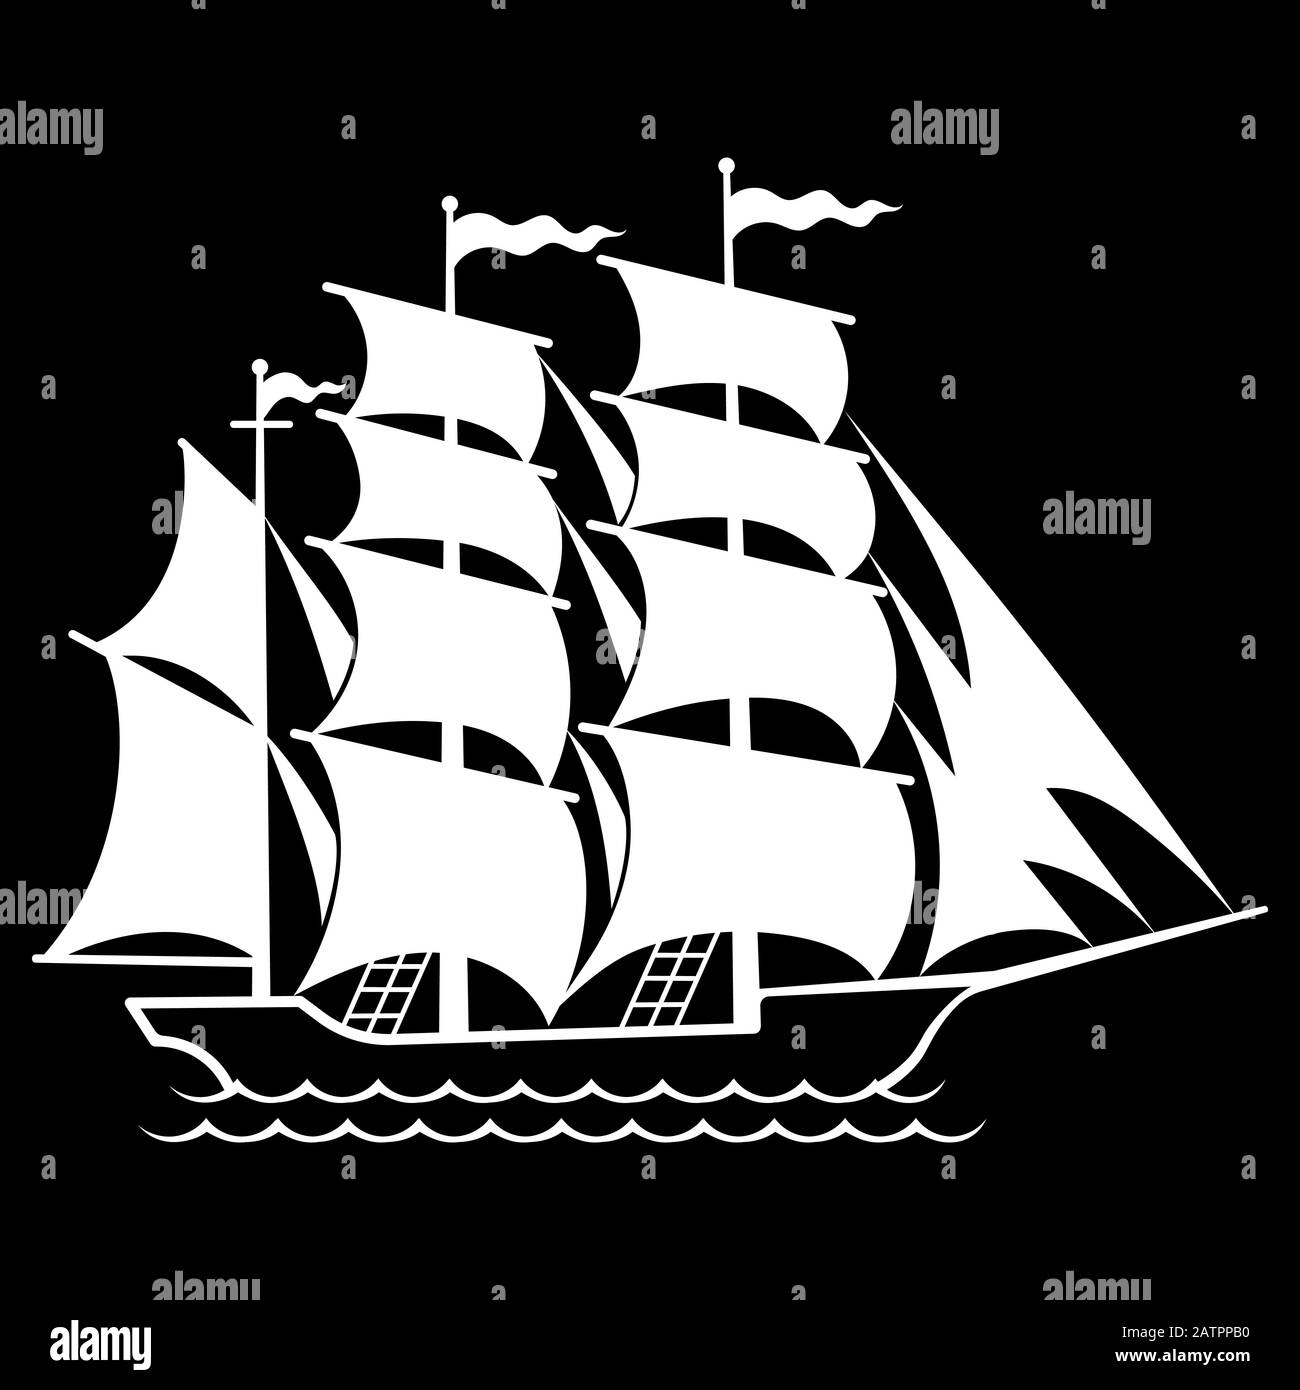 Silhouette of a sailing old ship, sailboat logo Stock Vector